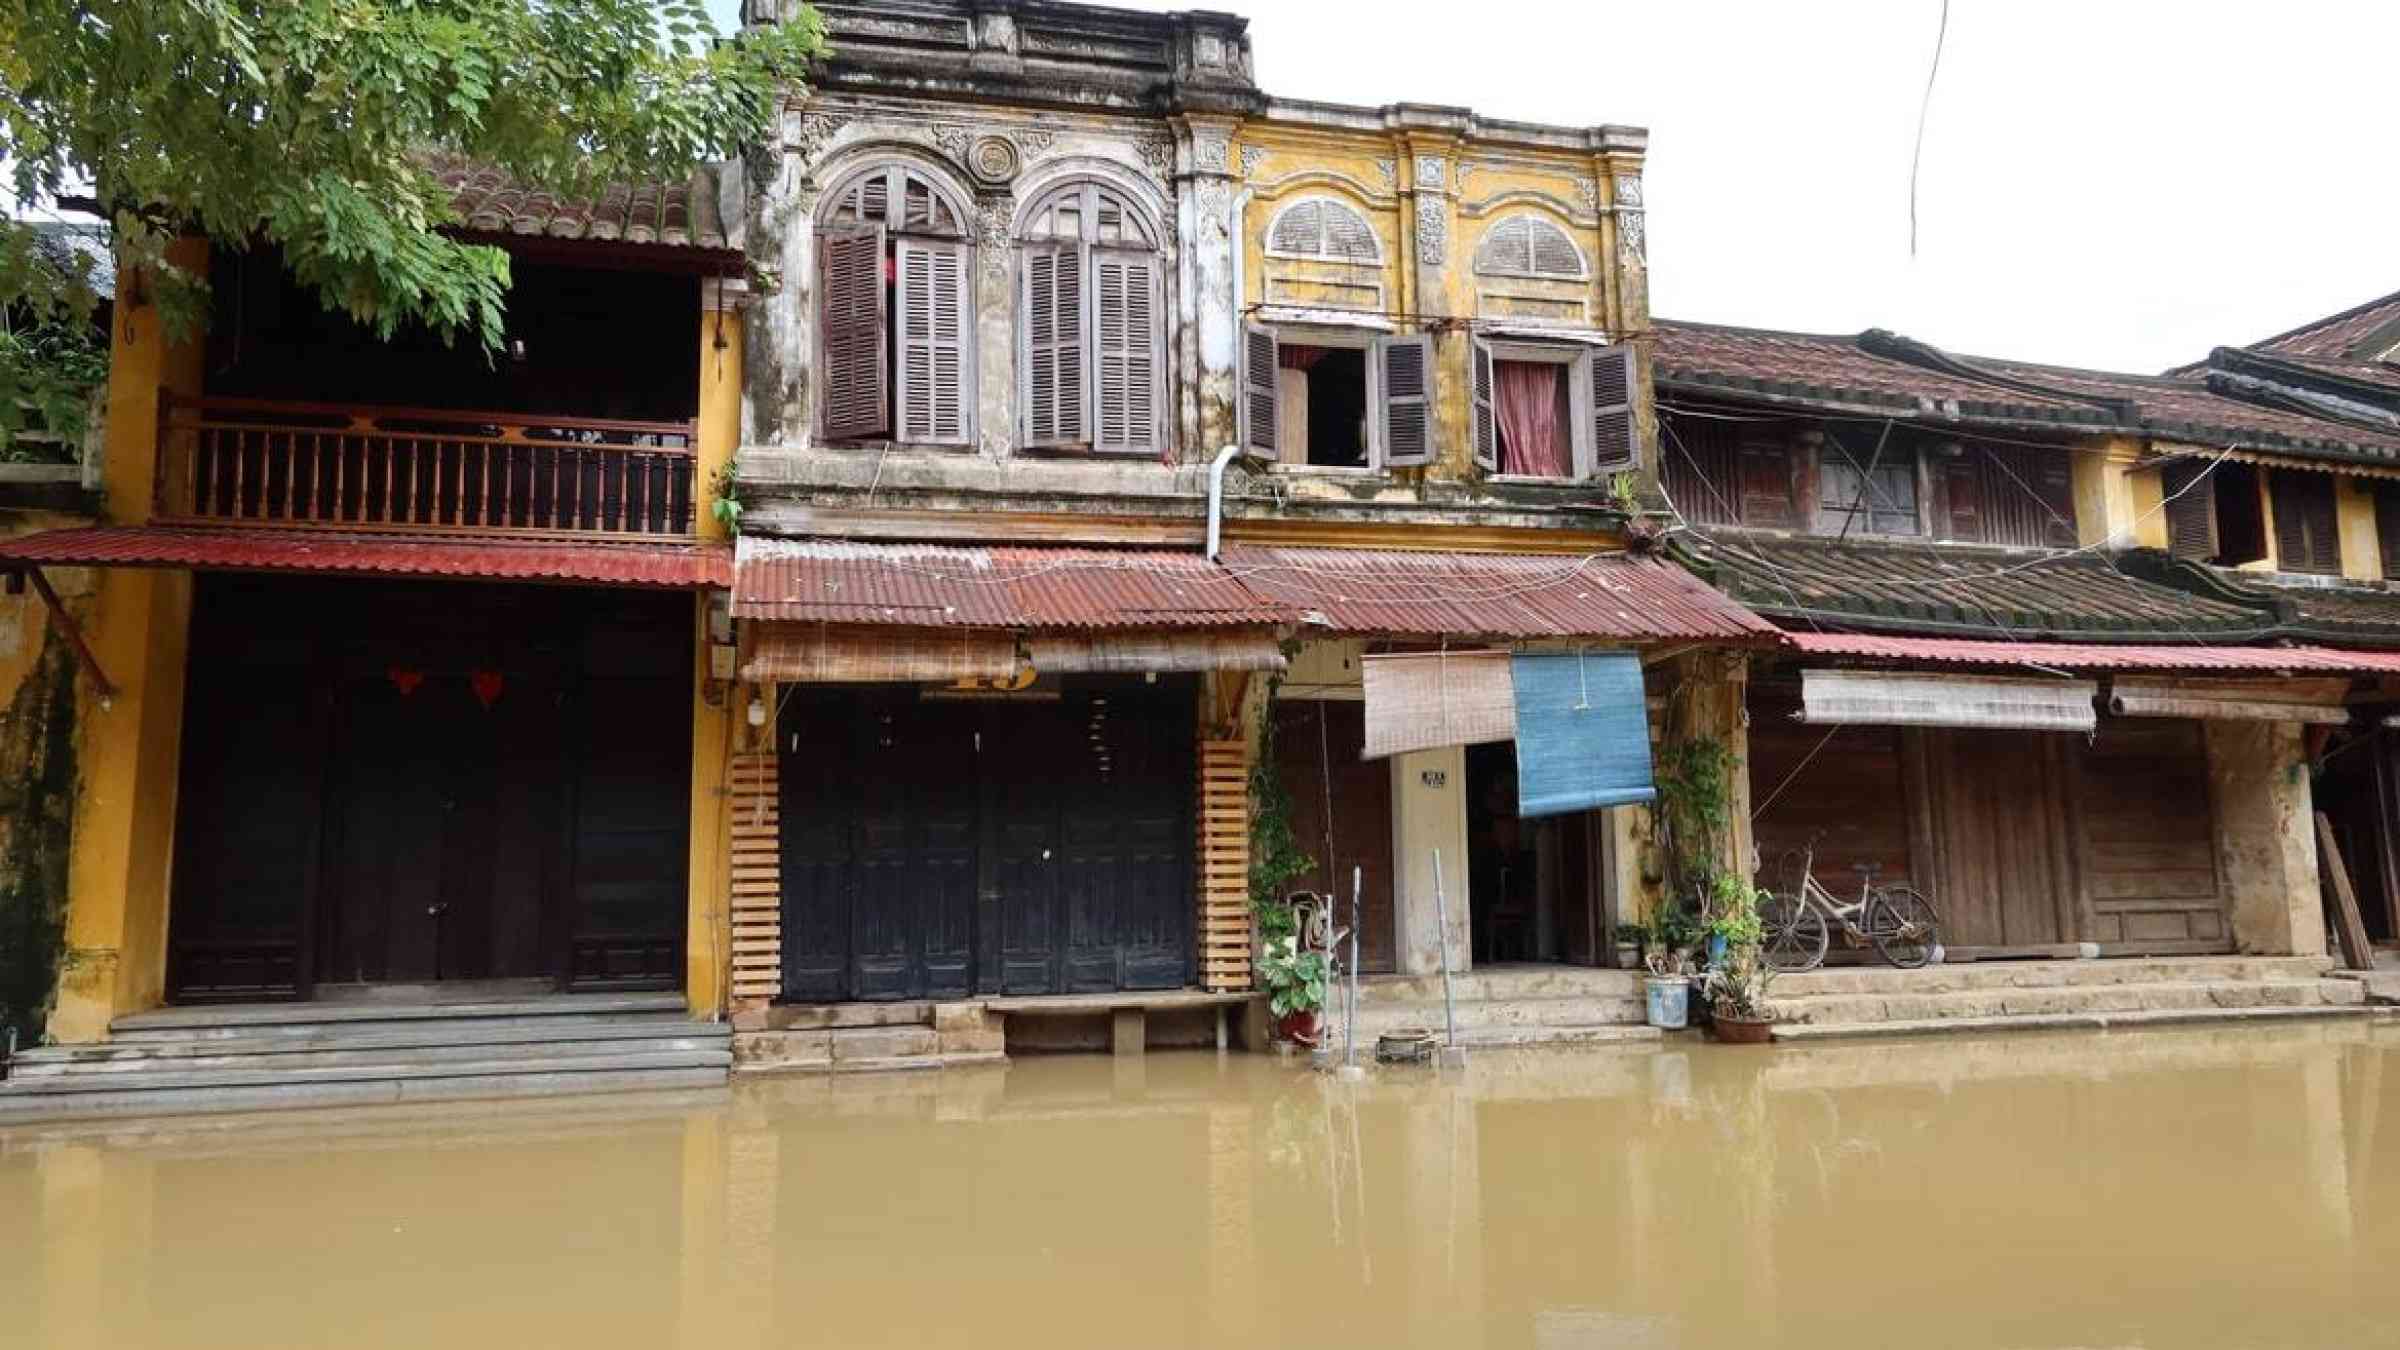 Old colonial buildings on a street in downtown Hoi An, Vietnam along the Thu Bon River flooded during the 2021 rainy season